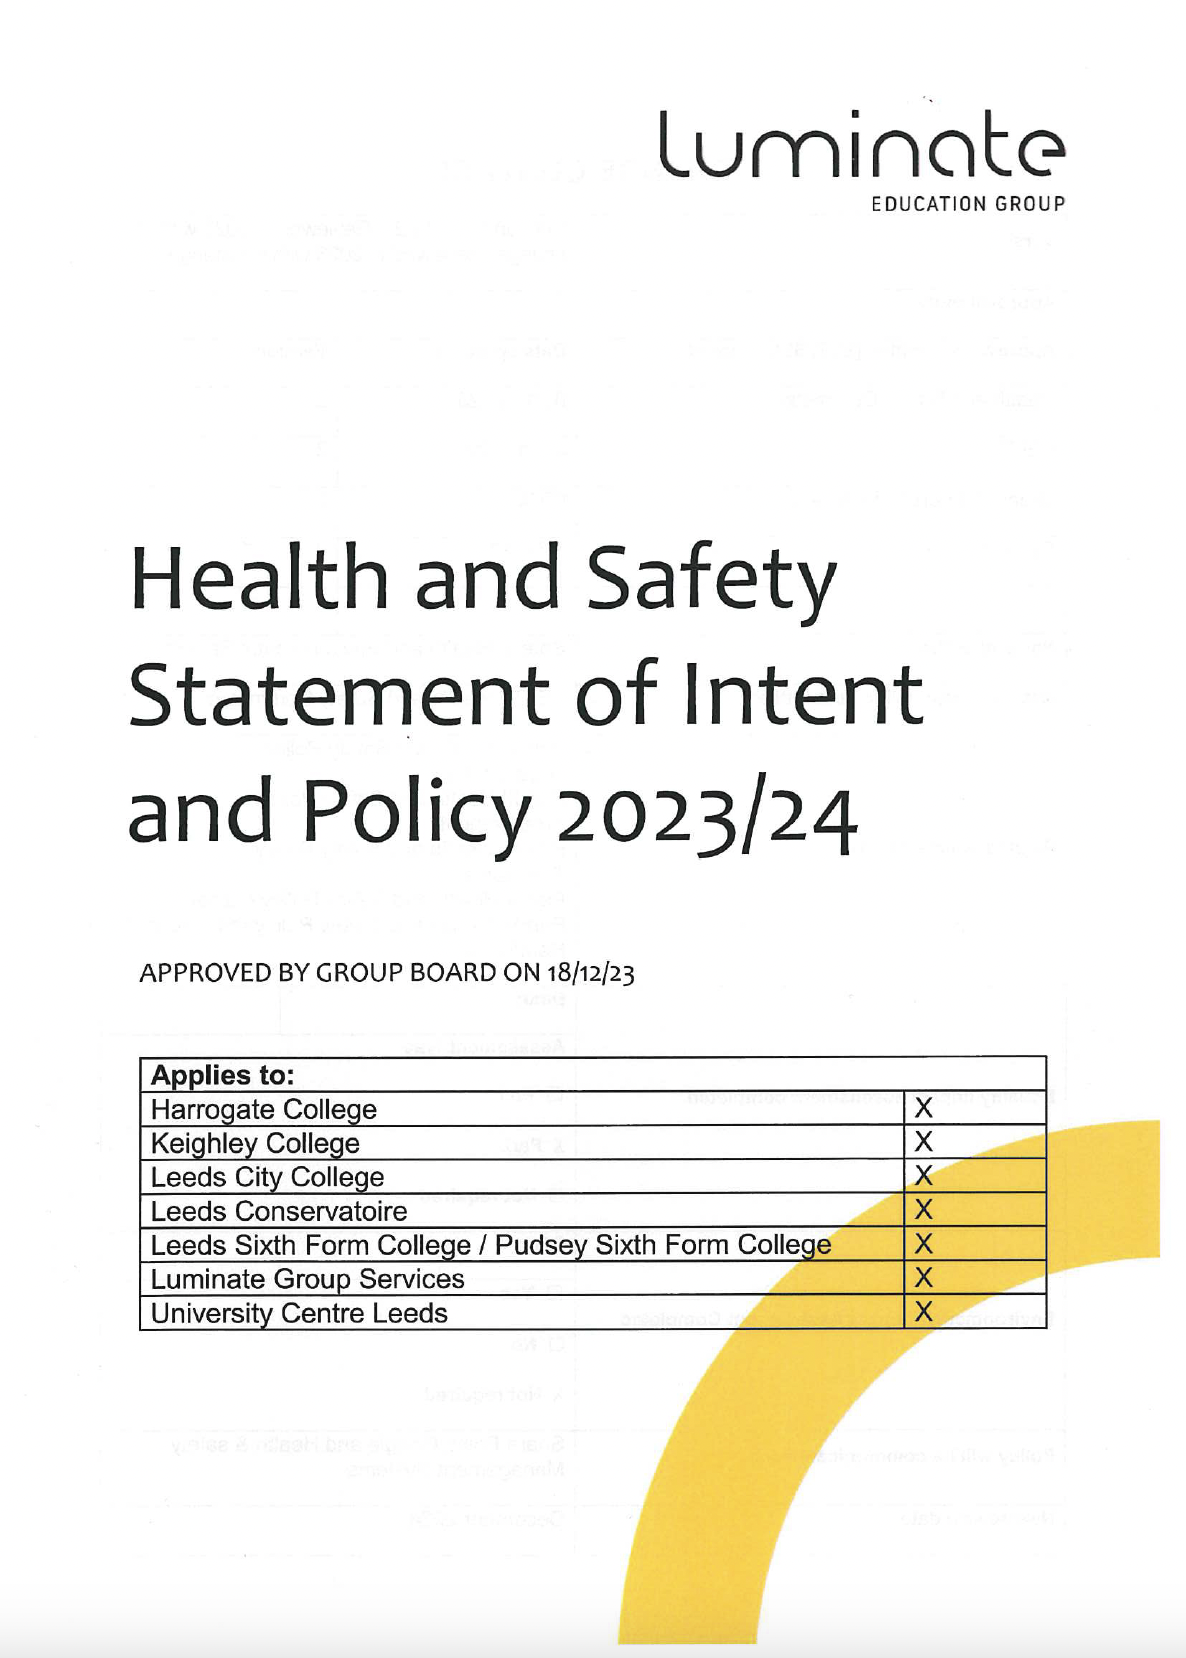 Health & Safety Statement of Intent & Policy 2023/24 cover